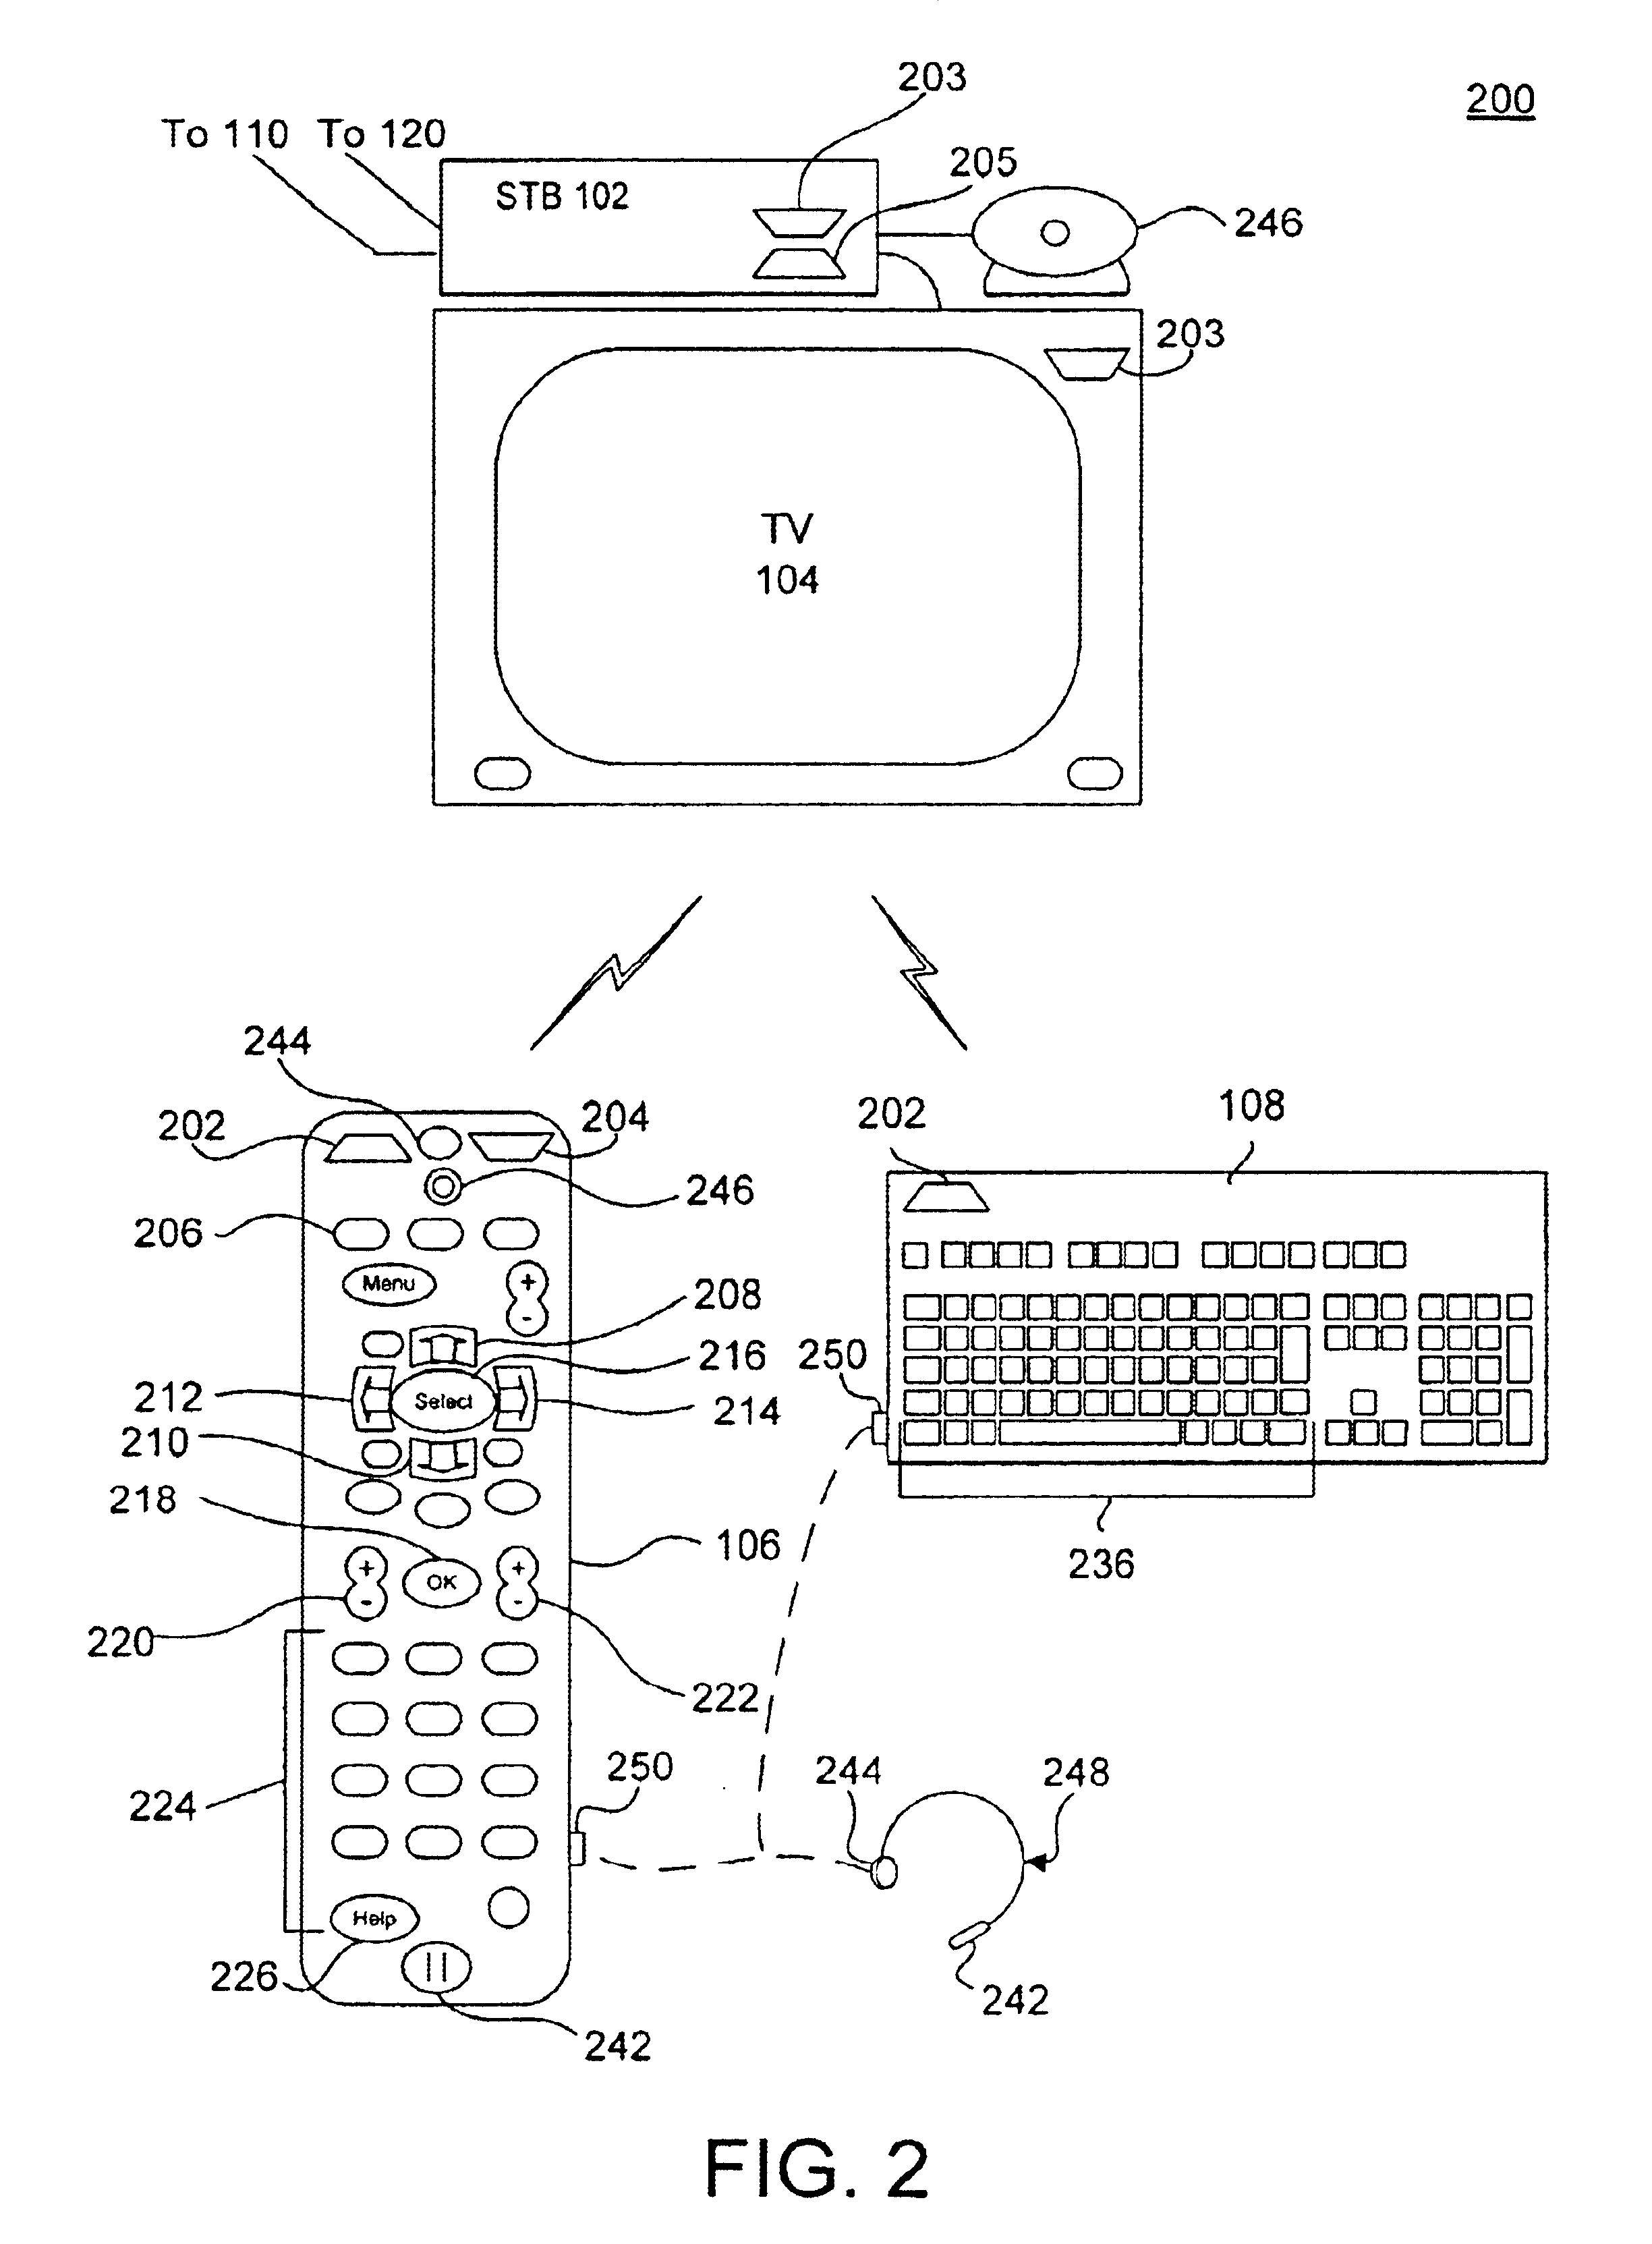 System and method for providing conditional access to digital content